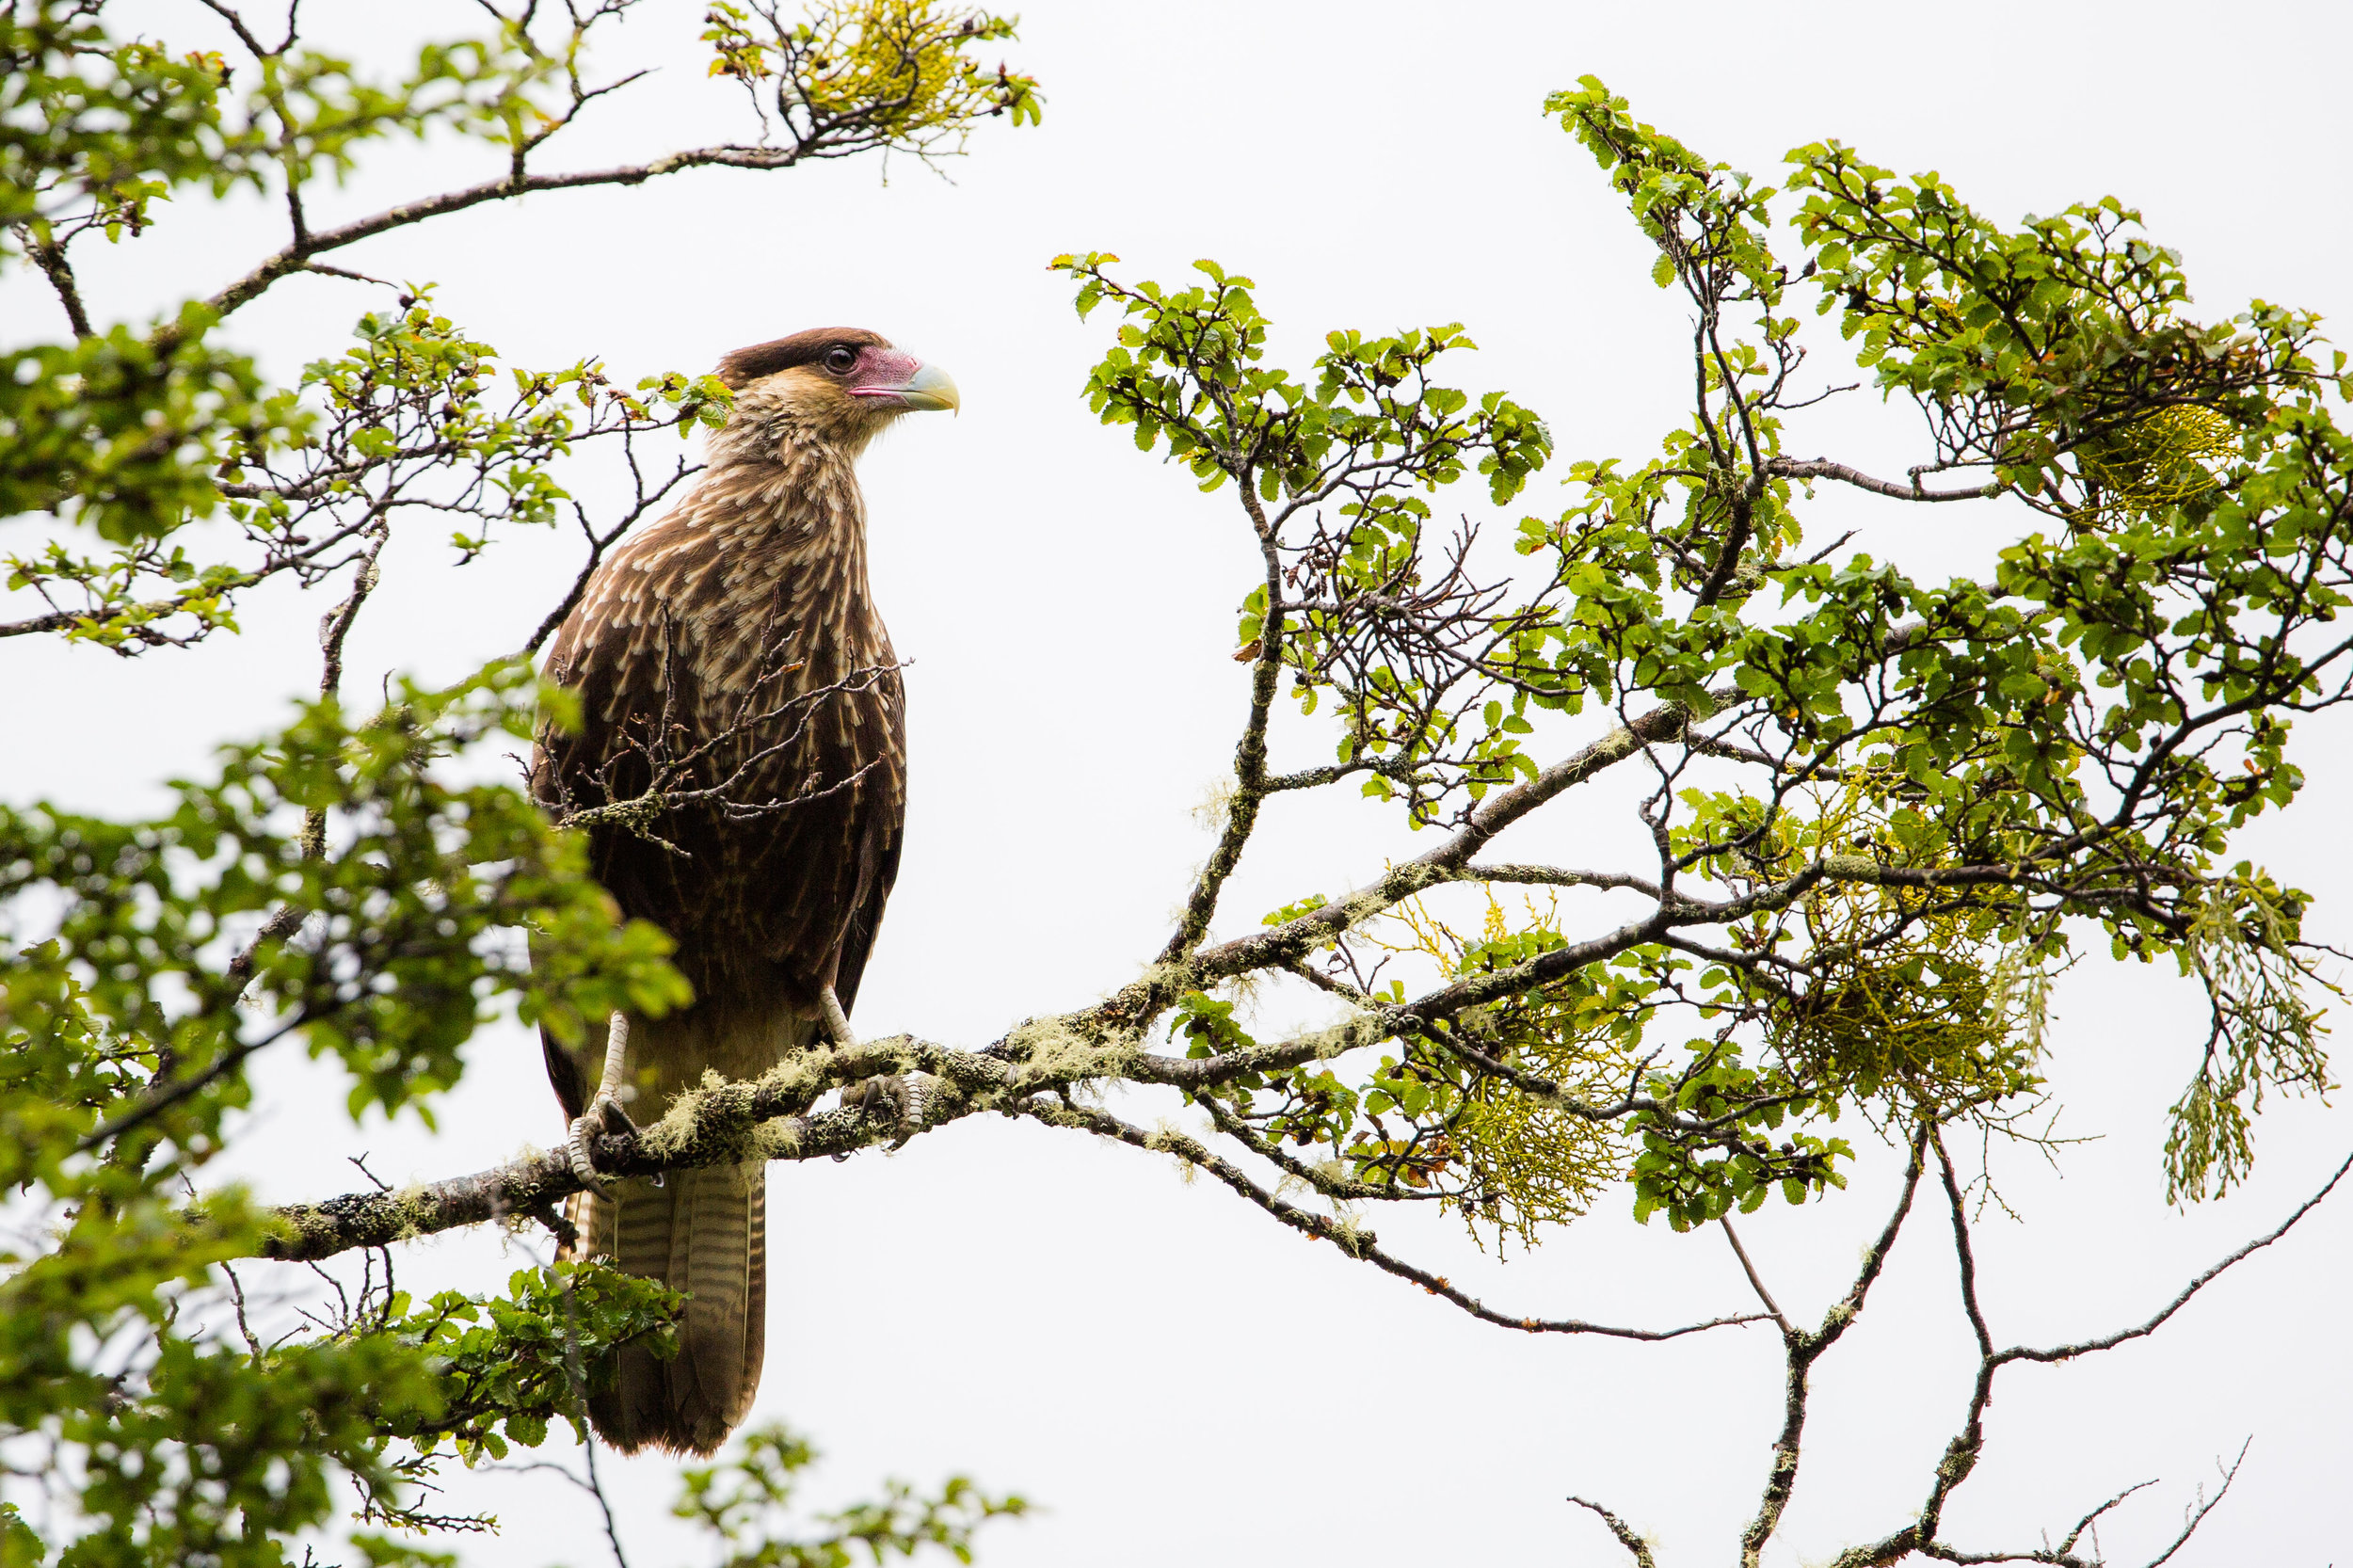 A southern crested caracara greeted us almost at the entrance in the park.